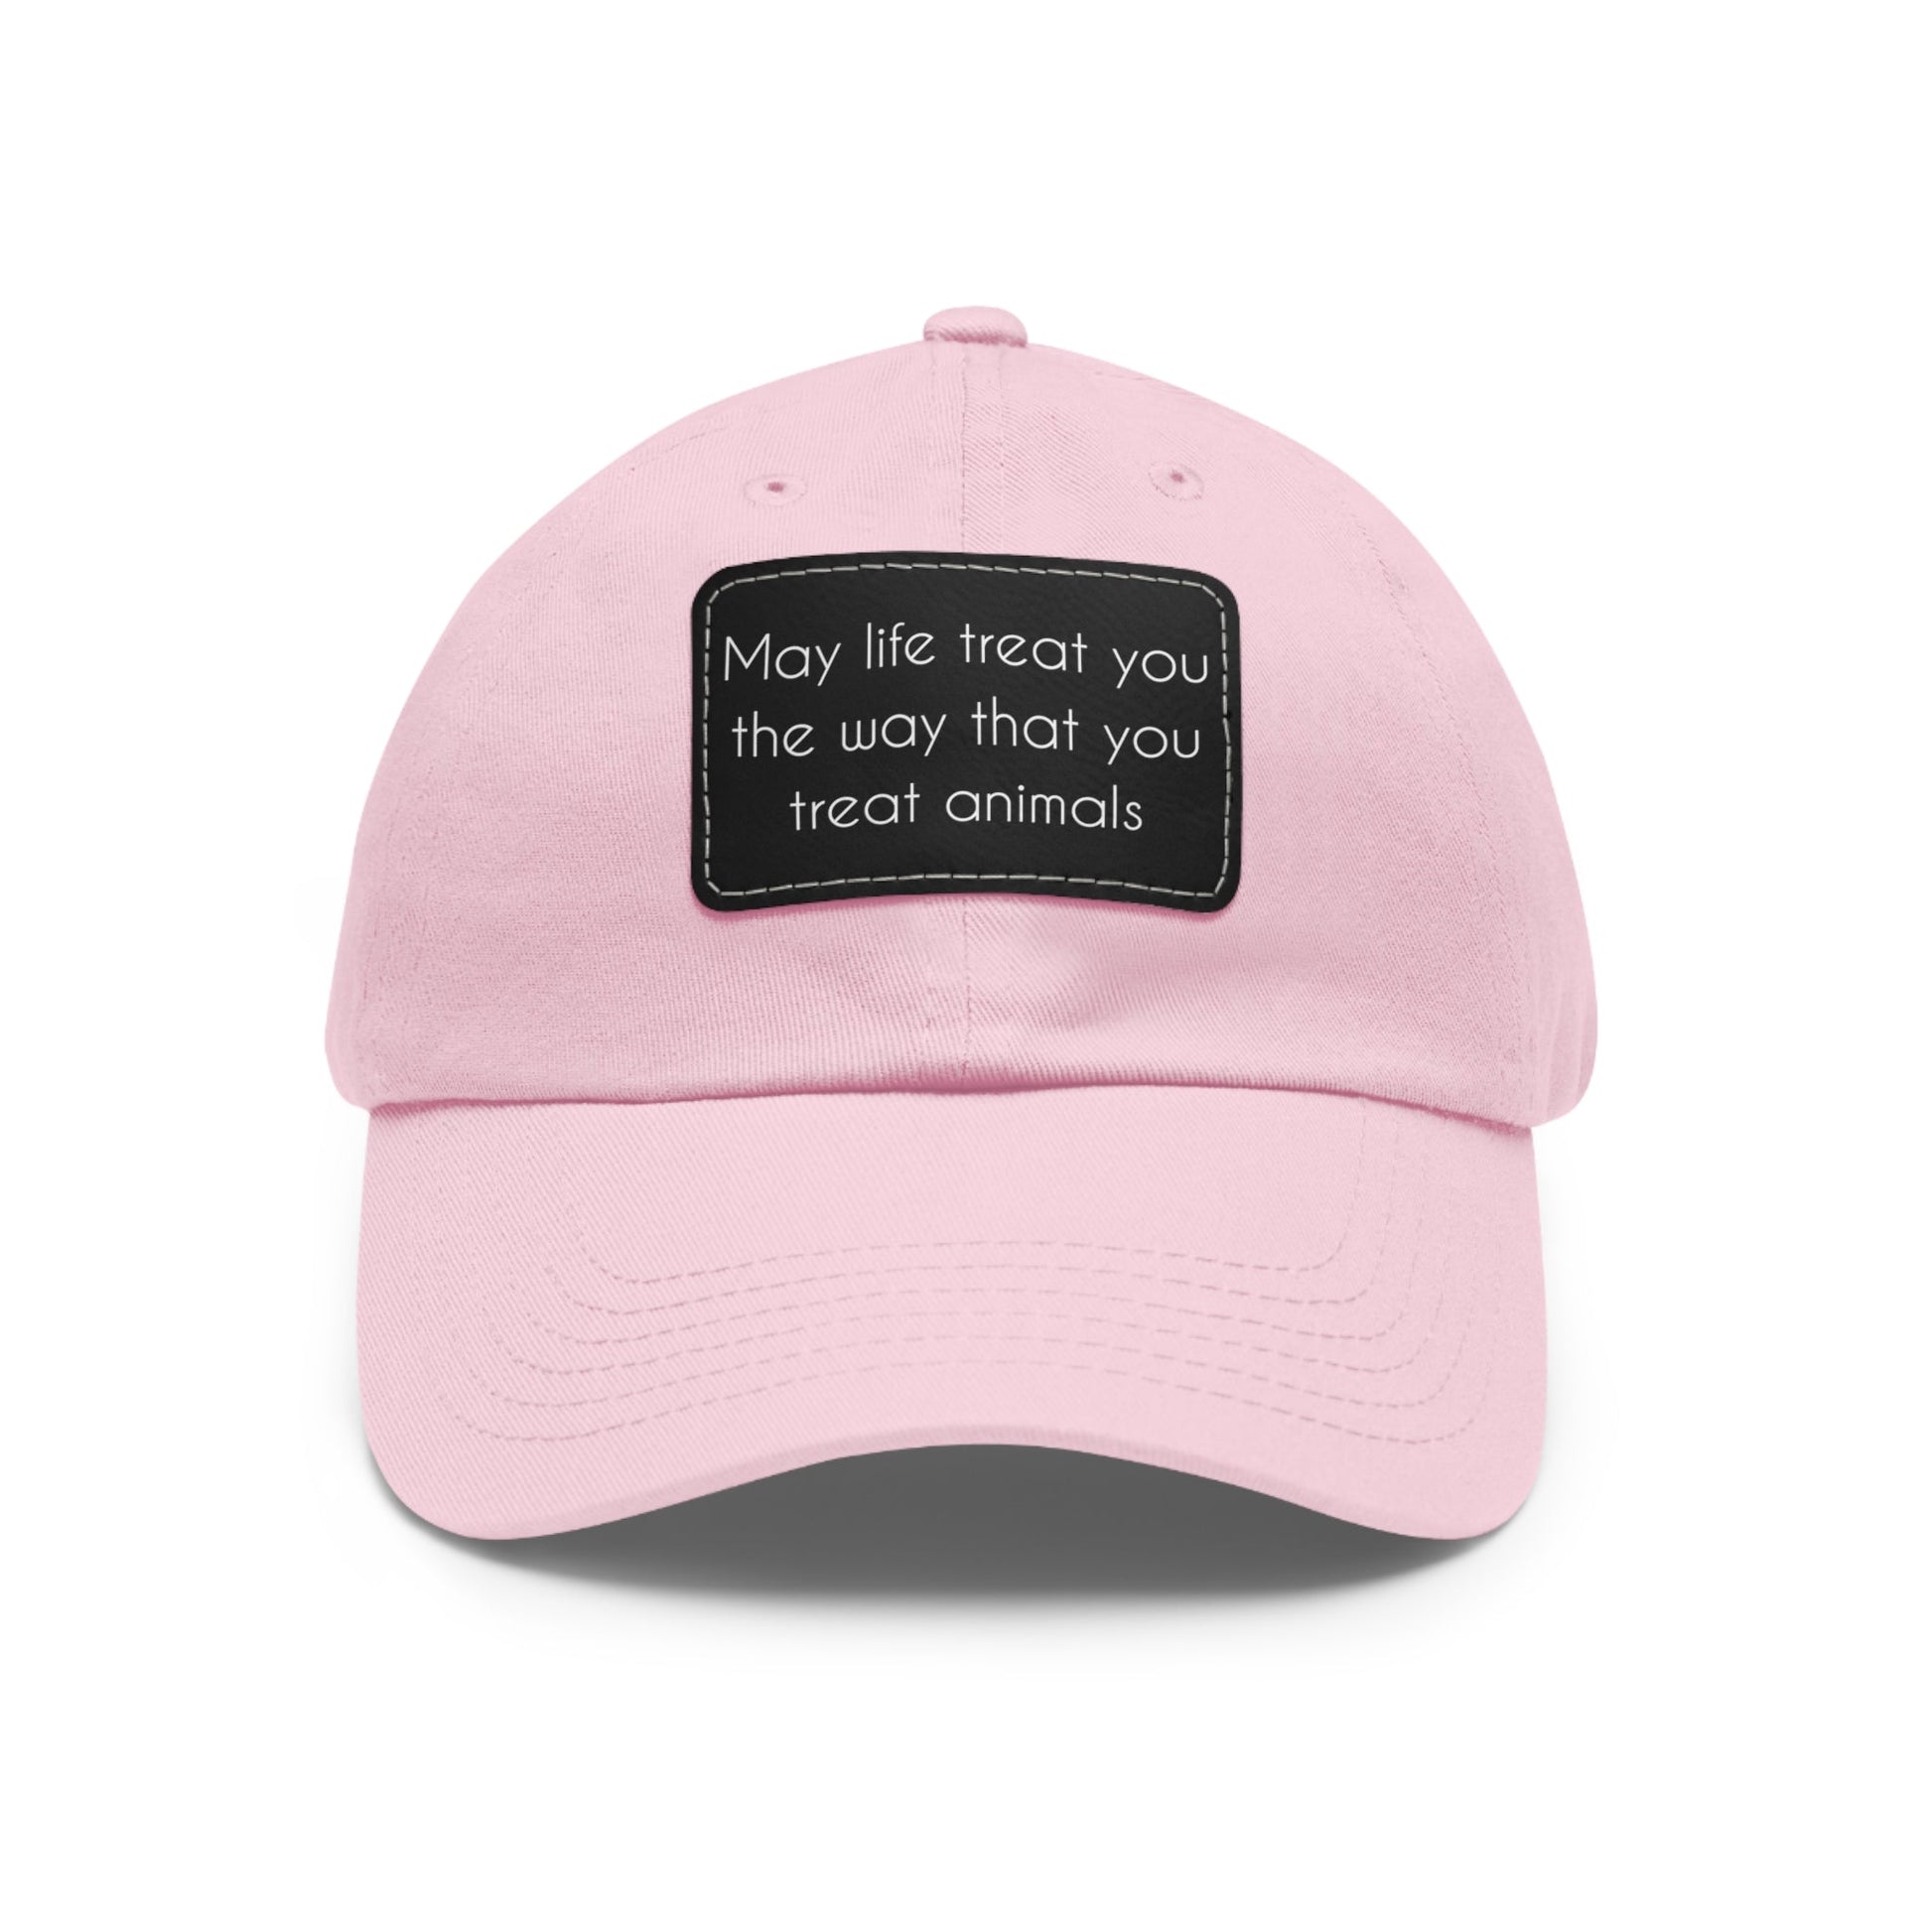 May Life Treat You The Way That You Treat Animals | Dad Hat - Detezi Designs-32921679455857130058